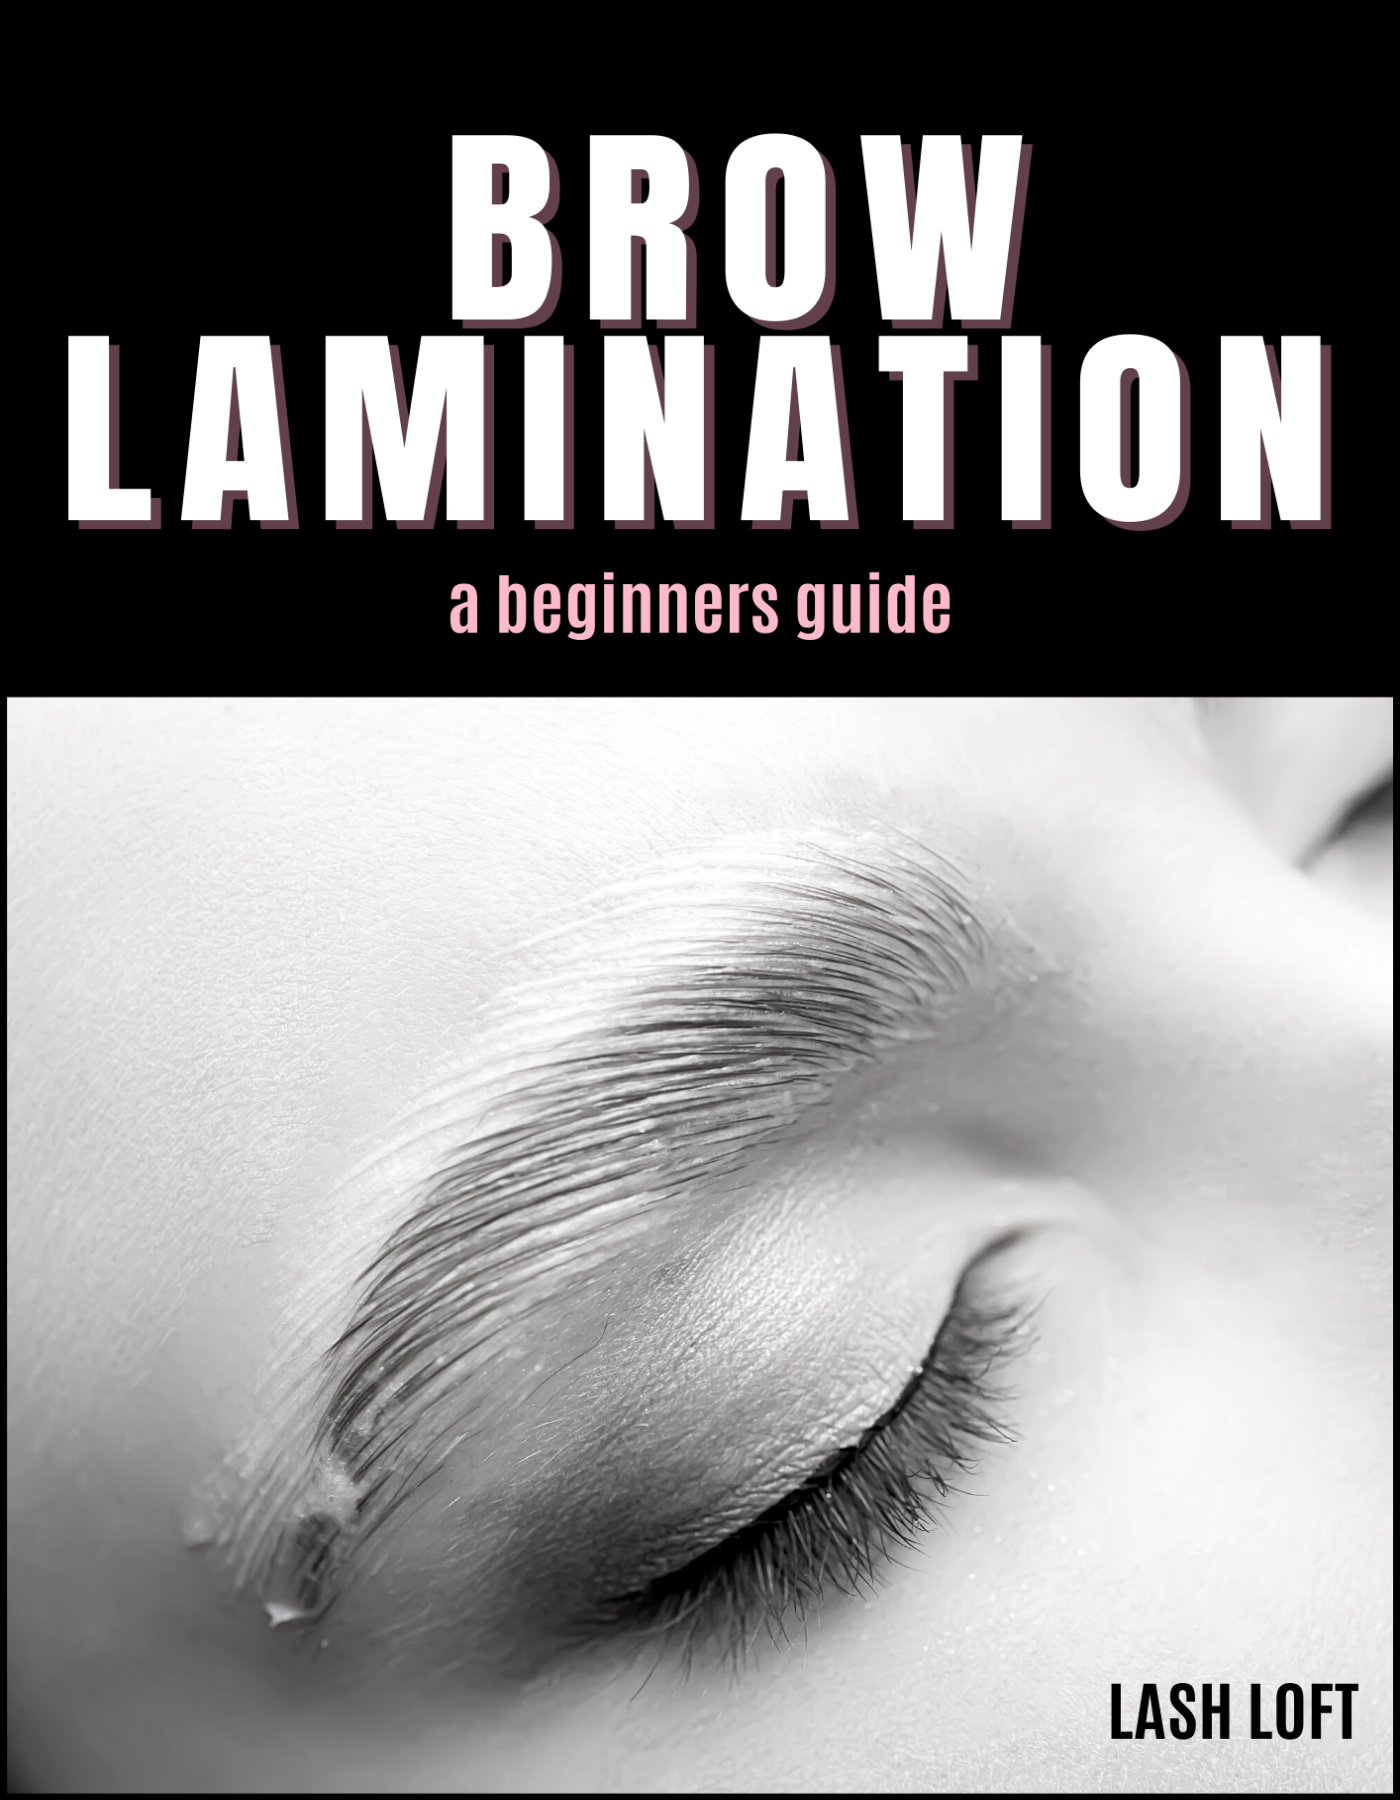 Online Brow Lamination & Tint Course